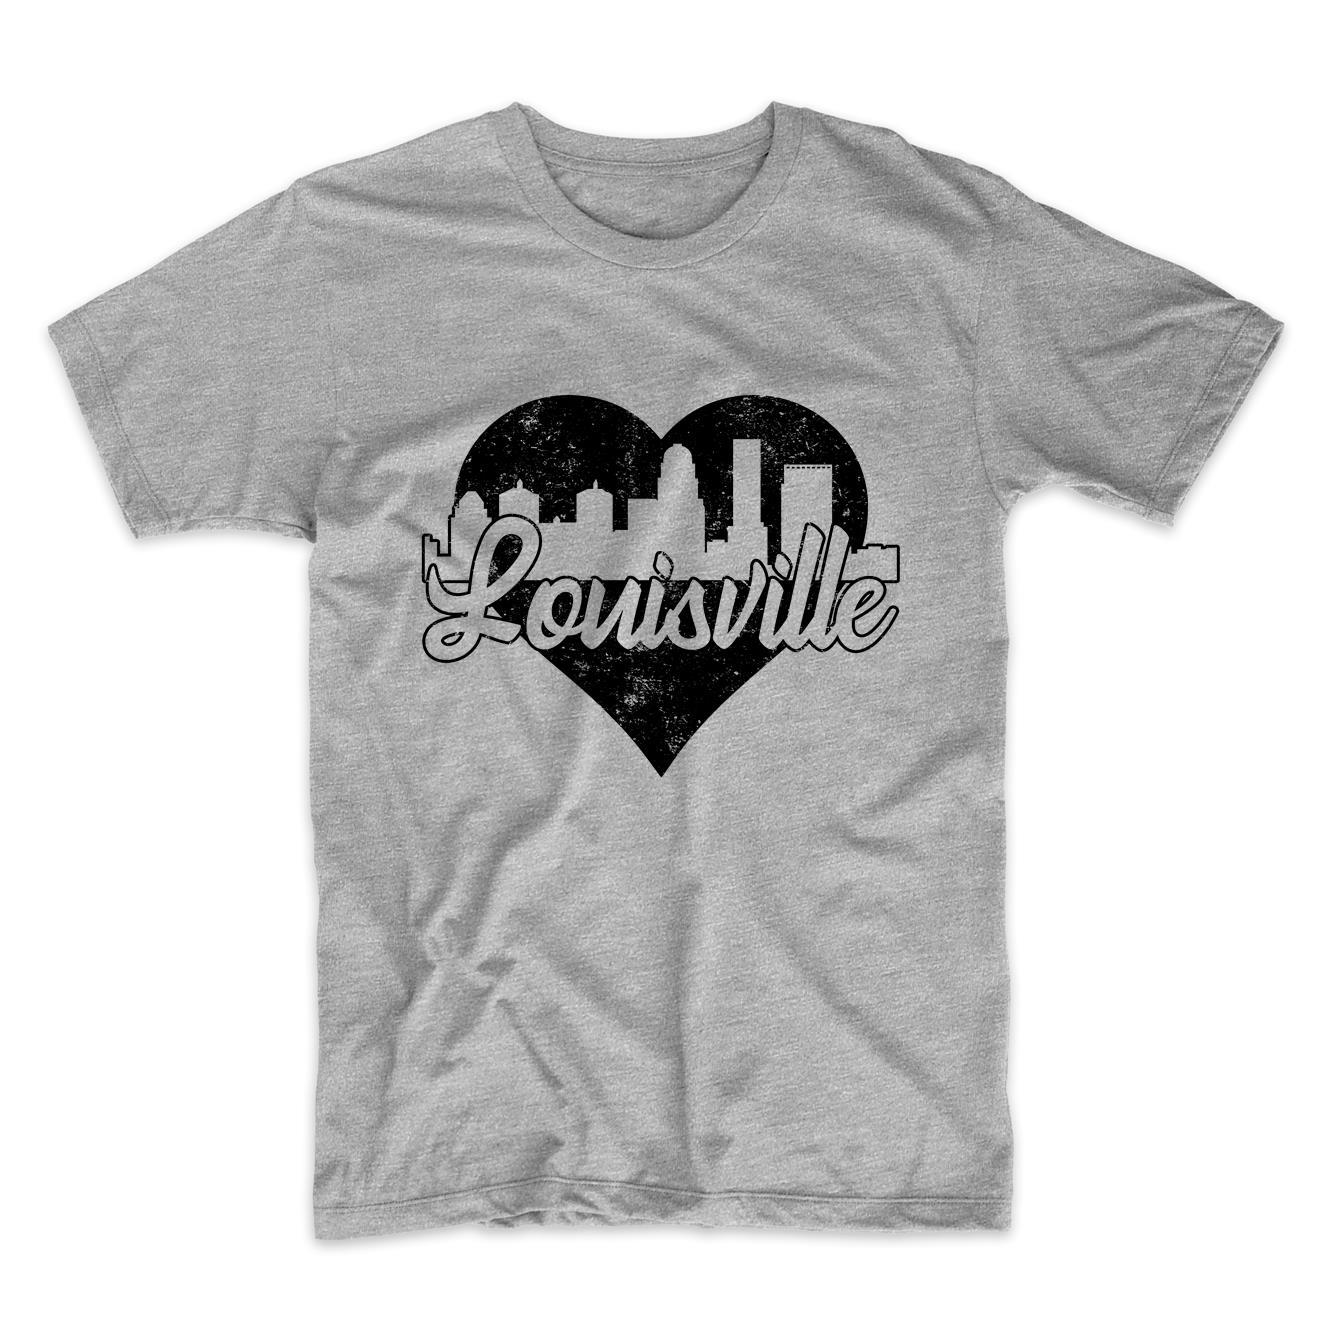 Really Awesome Shirts Retro Louisville Kentucky Skyline Heart Distressed T-Shirt Men's Small / Grey